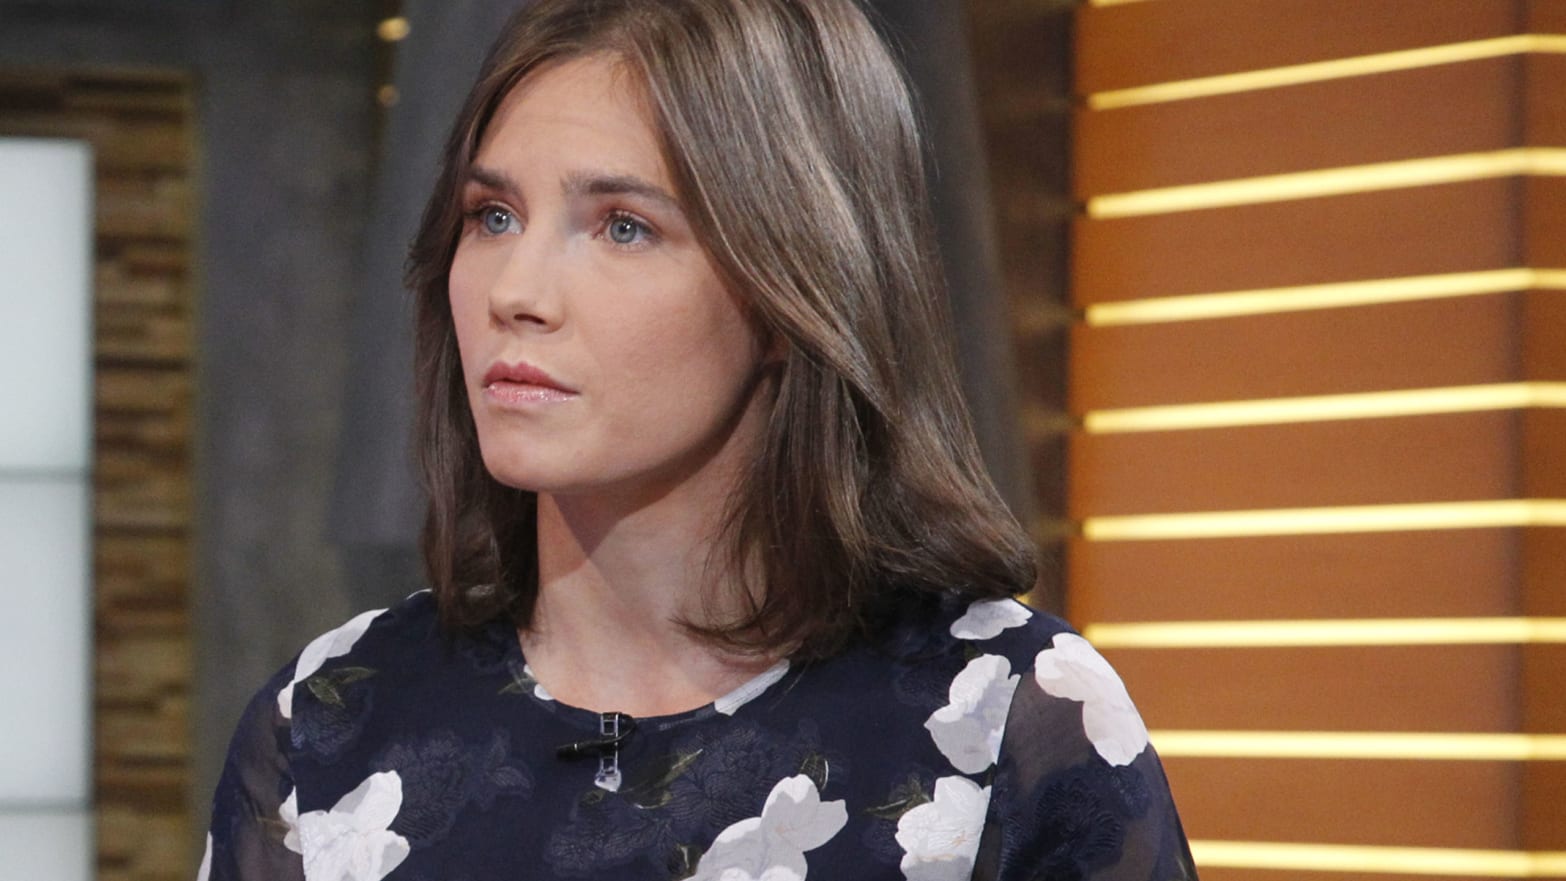 Amanda Knox says she wants to go back to Perugia 10 years after the murder of her roommate to “close the circle.”